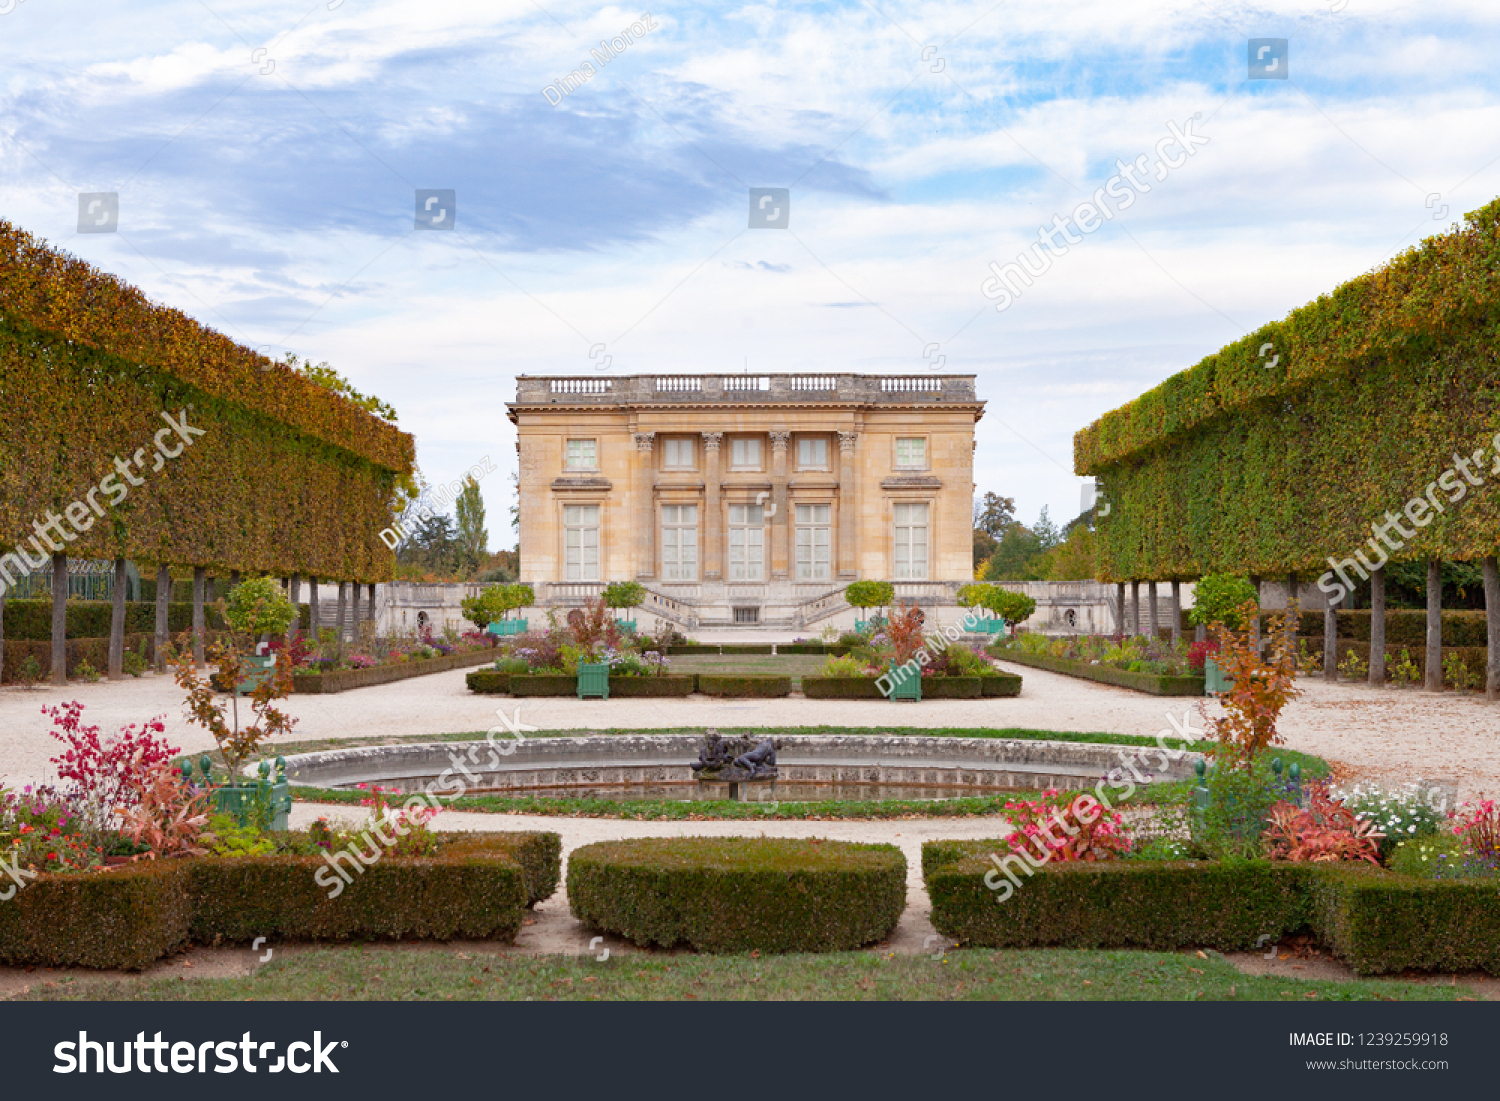 The Petit Trianon of Palace of Versailles, France #1239259918